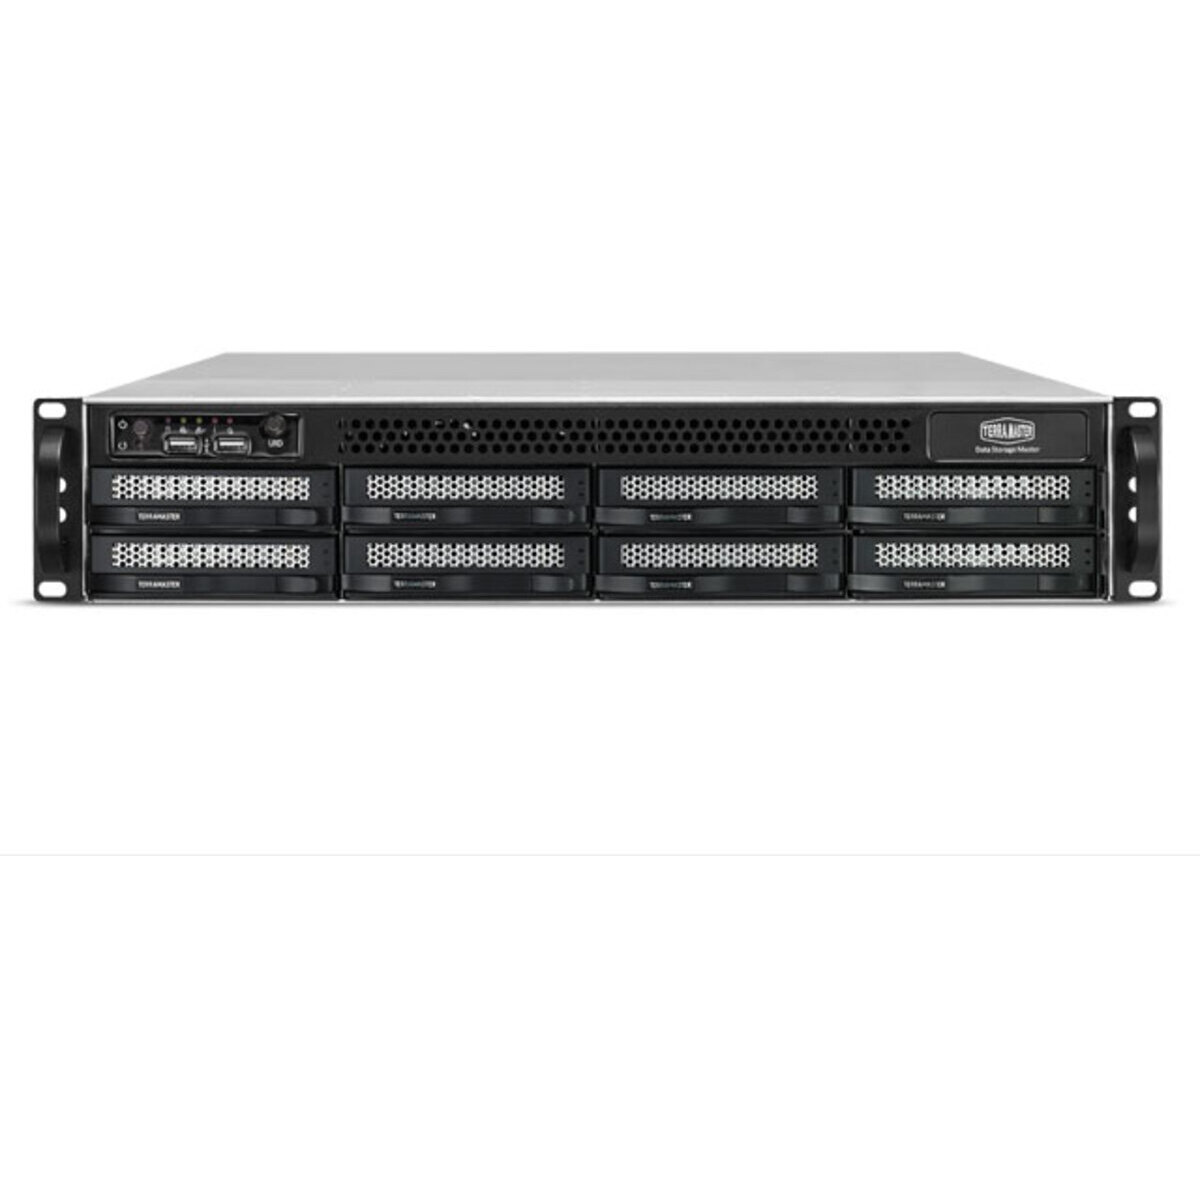 TerraMaster U8-522-9400 48tb 8-Bay RackMount Large Business / Enterprise NAS - Network Attached Storage Device 8x6tb Western Digital Red Pro WD6003FFBX 3.5 7200rpm SATA 6Gb/s HDD NAS Class Drives Installed - Burn-In Tested U8-522-9400